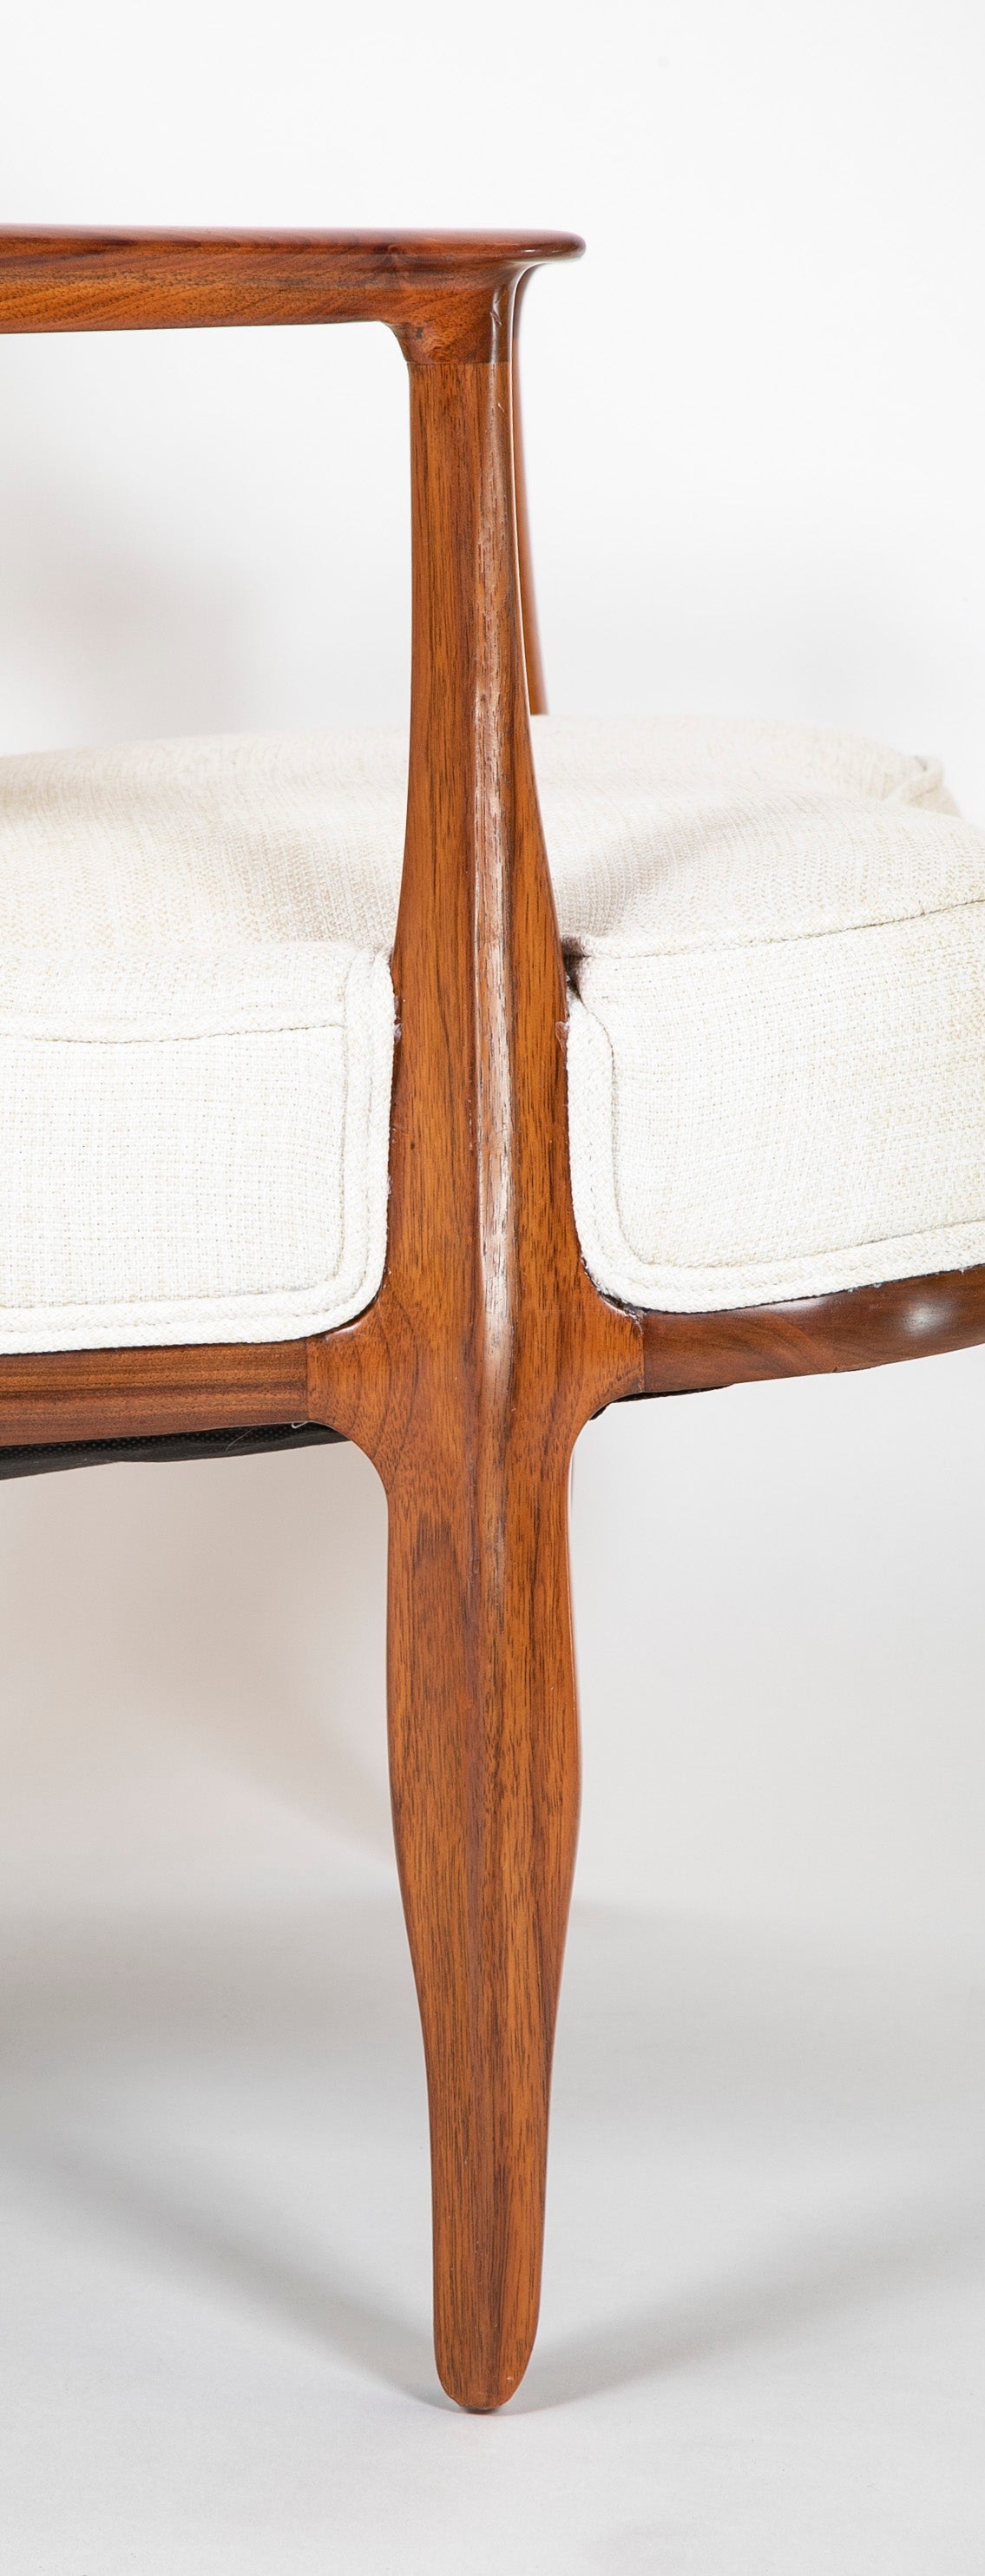 A Pair of Edward Wormley Tufted Armchairs from the Janus Collection